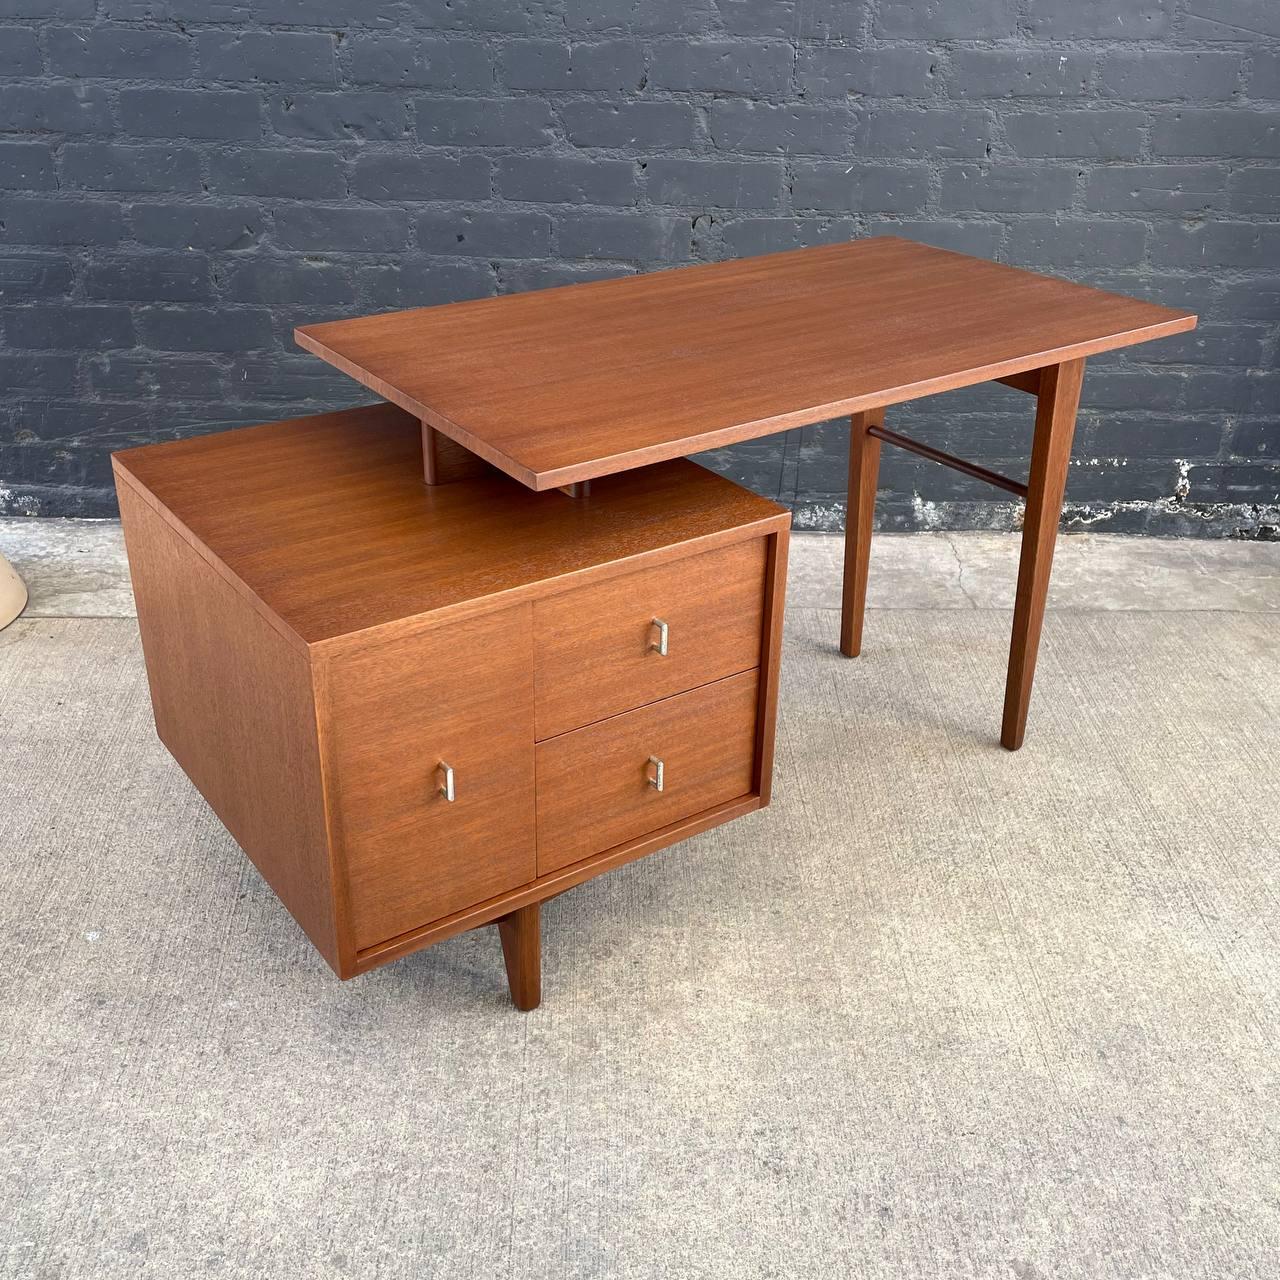 Newly Refinished - Mid-Century Modern Writing Desk by John Keal for Brown Saltman

Materials: Walnut-Stained Mahogany 

With over 15 years of experience, our workshop has followed a careful process of restoration, showcasing our passion and